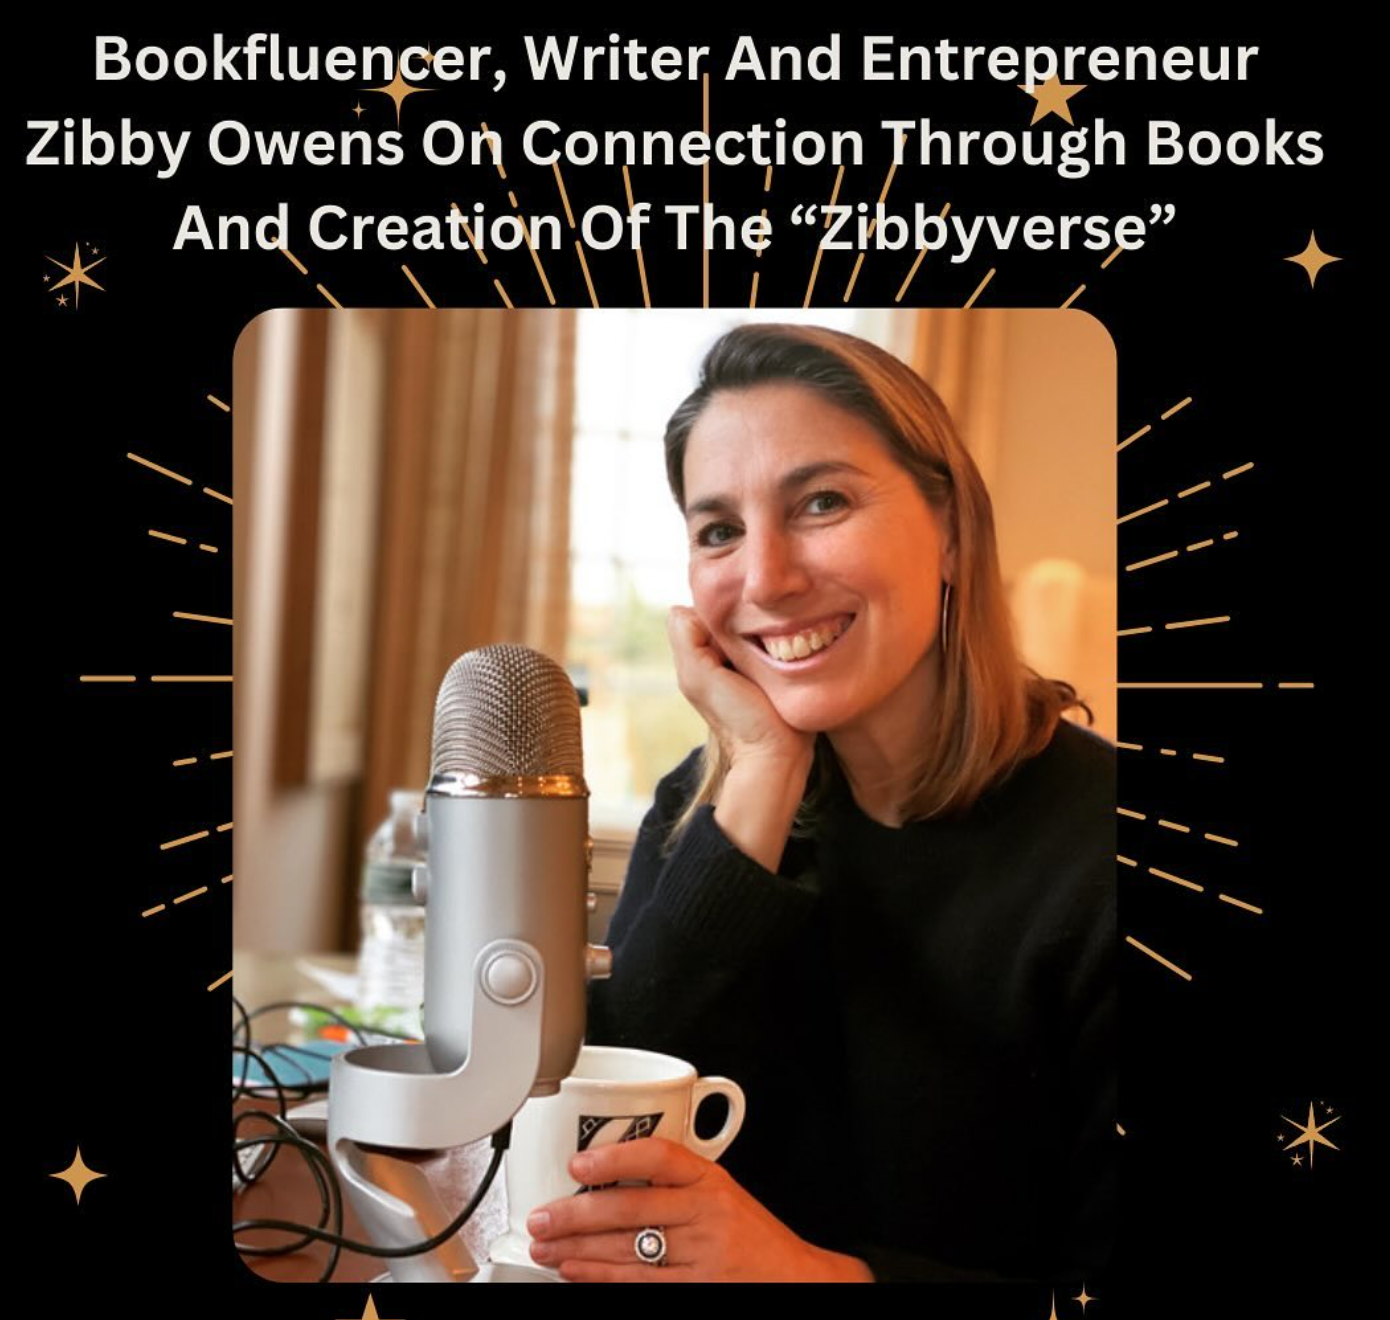 Bookfluencer, Writer and Entrepreneur Zibby Owens on Connection Through Books and Creation of the “Zibbyverse”